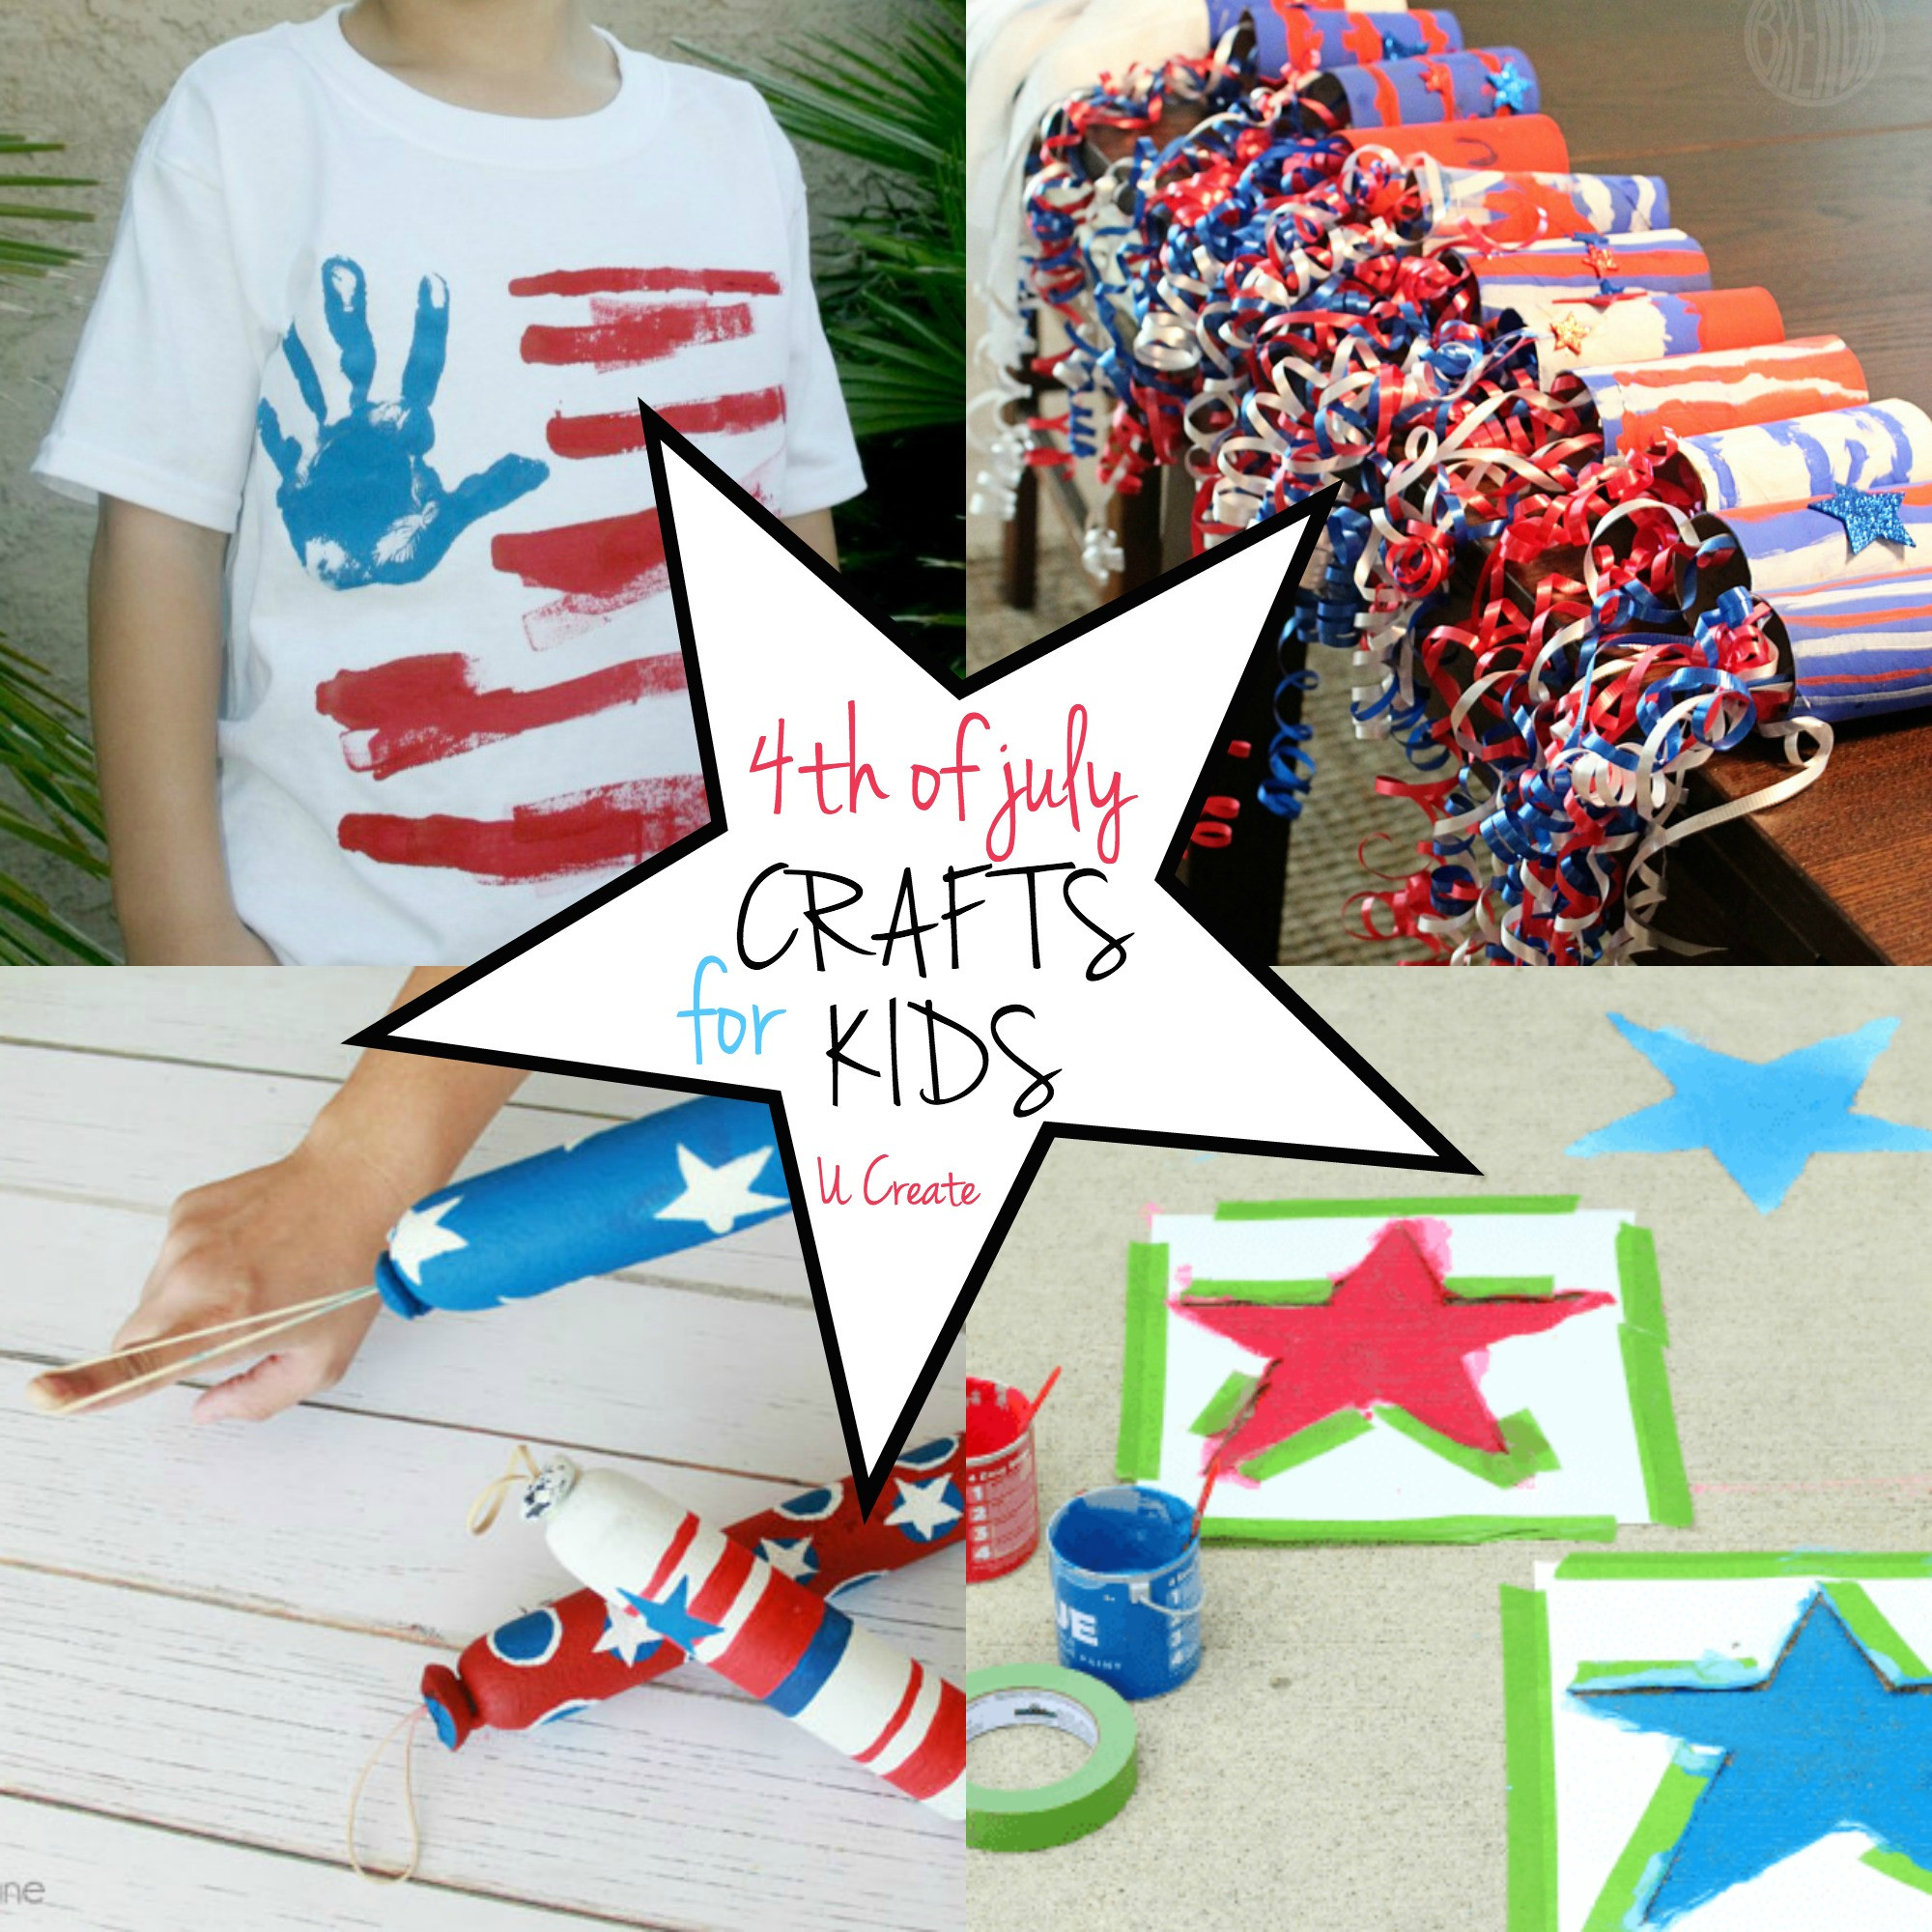 4th Of July Crafts For Kids
 4th of July Crafts for Kids